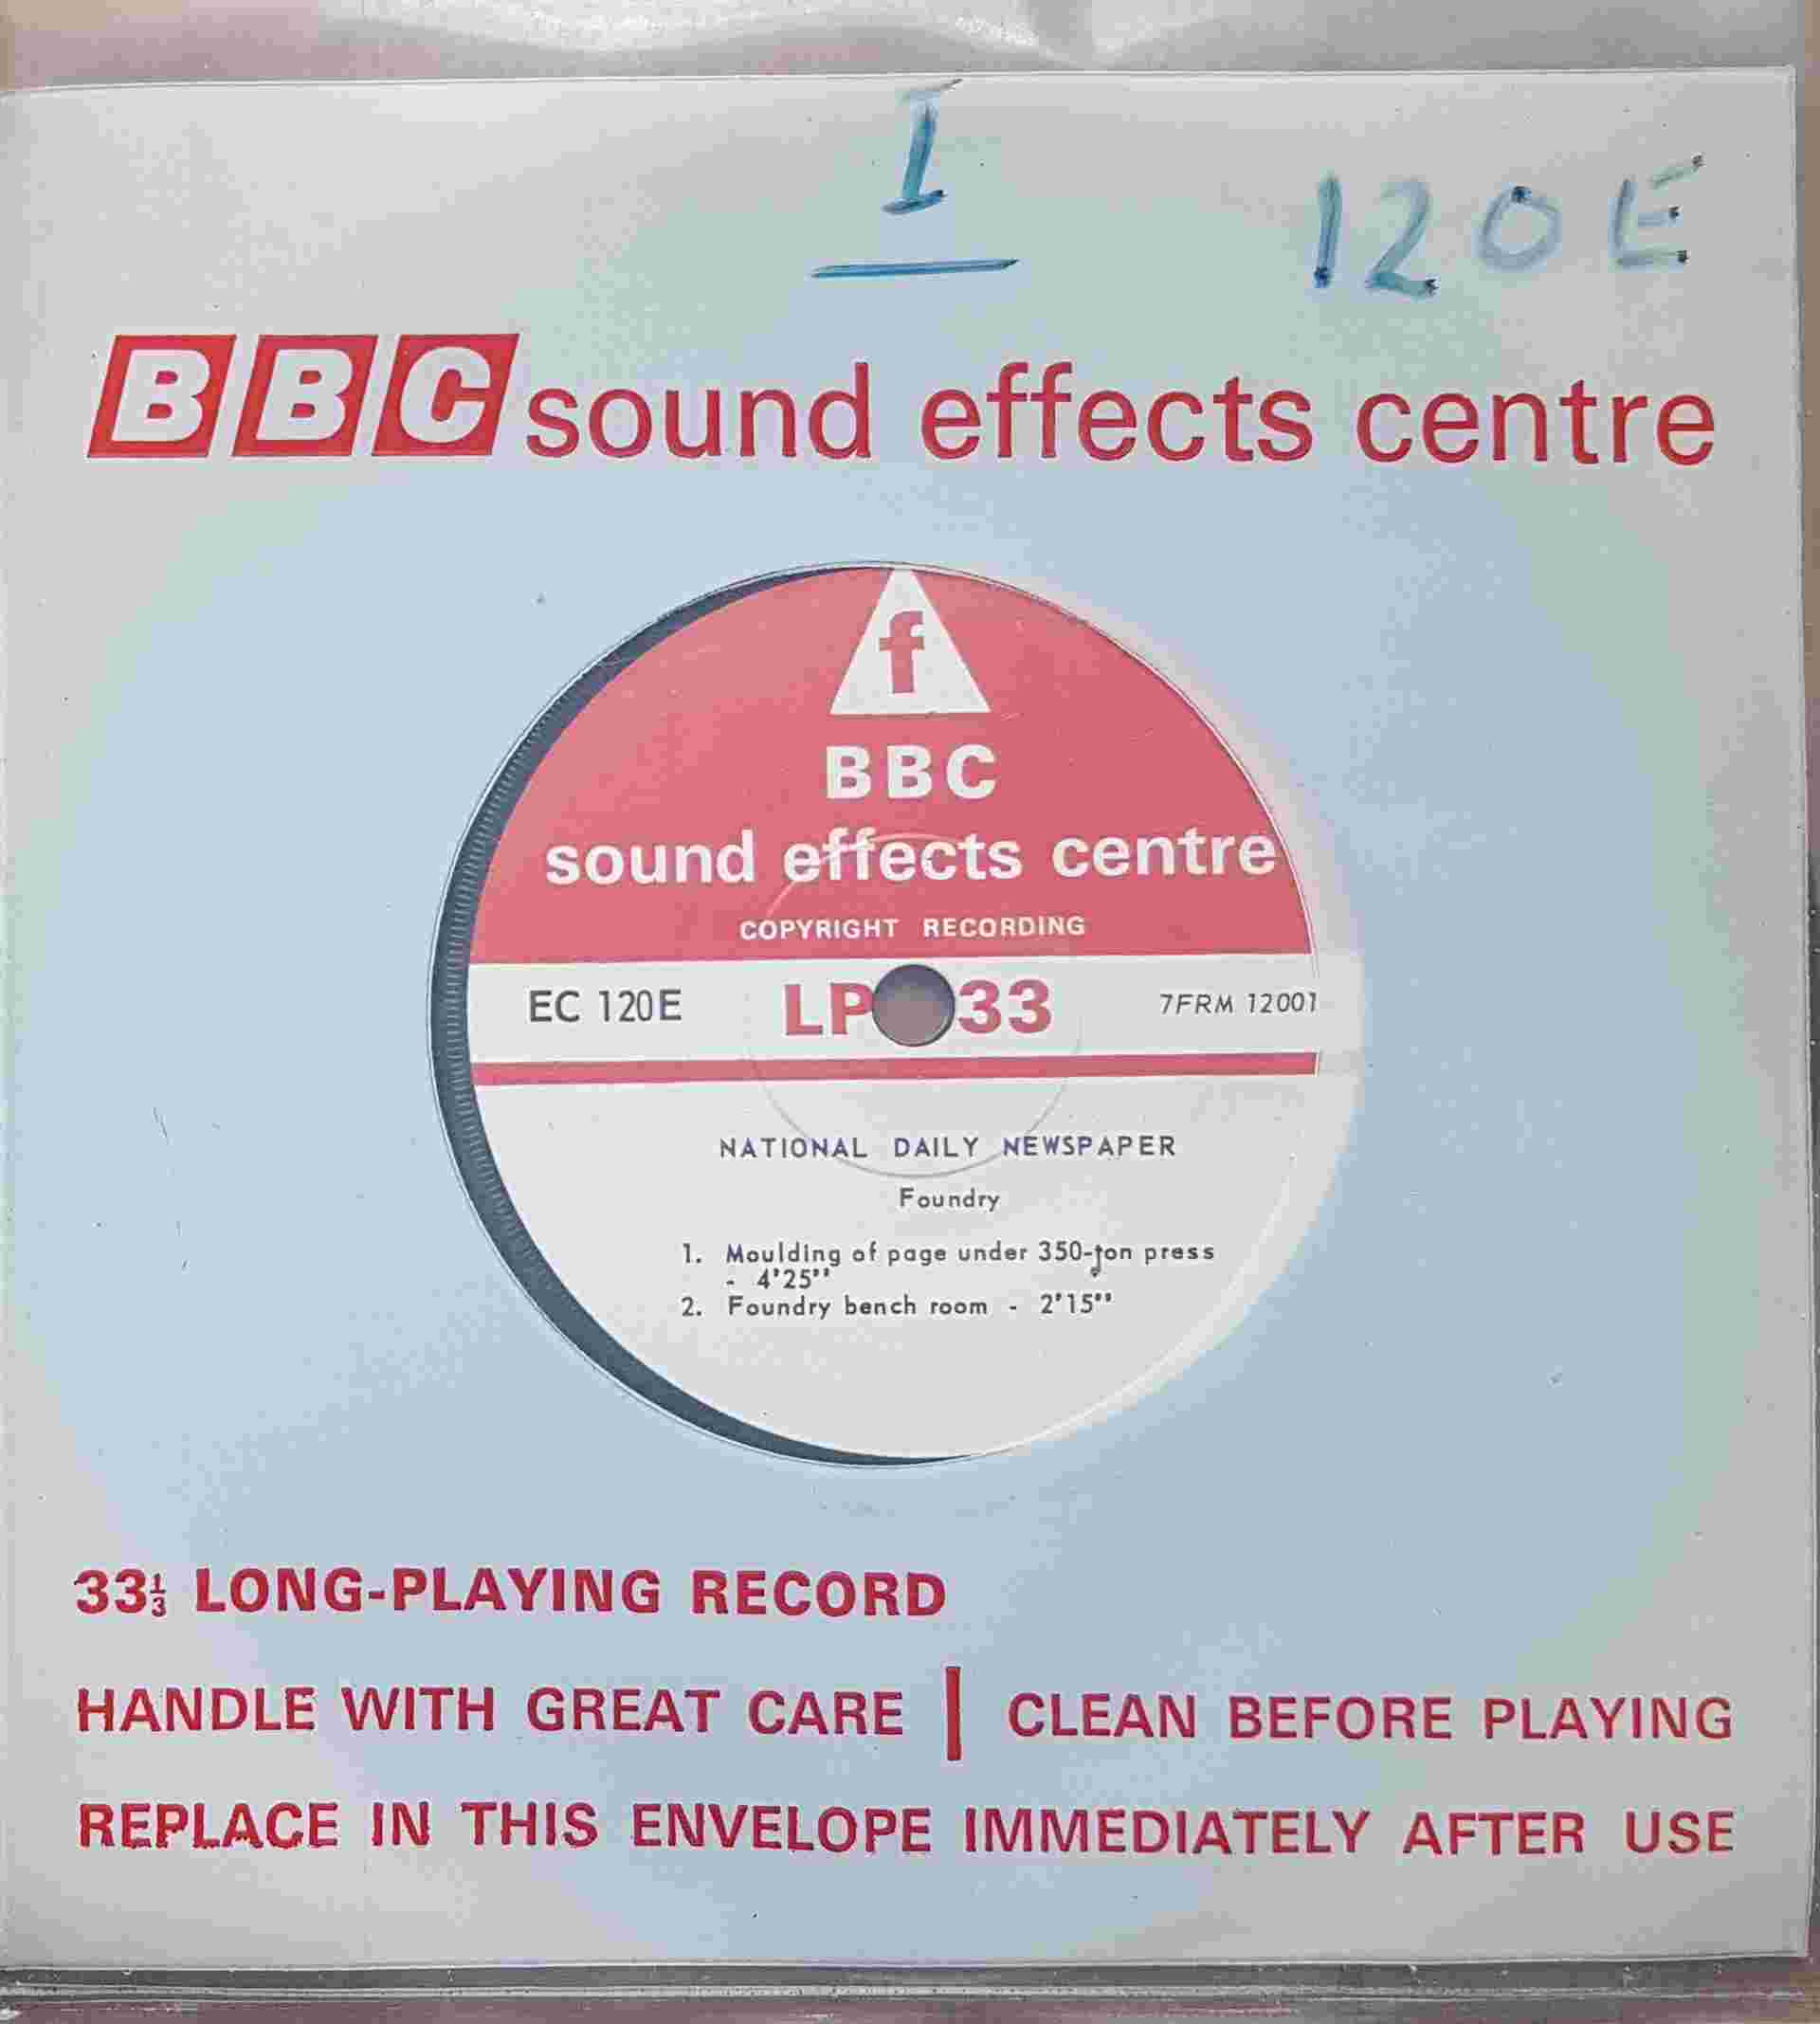 Picture of EC 120E National daily newspaper by artist Not registered from the BBC singles - Records and Tapes library